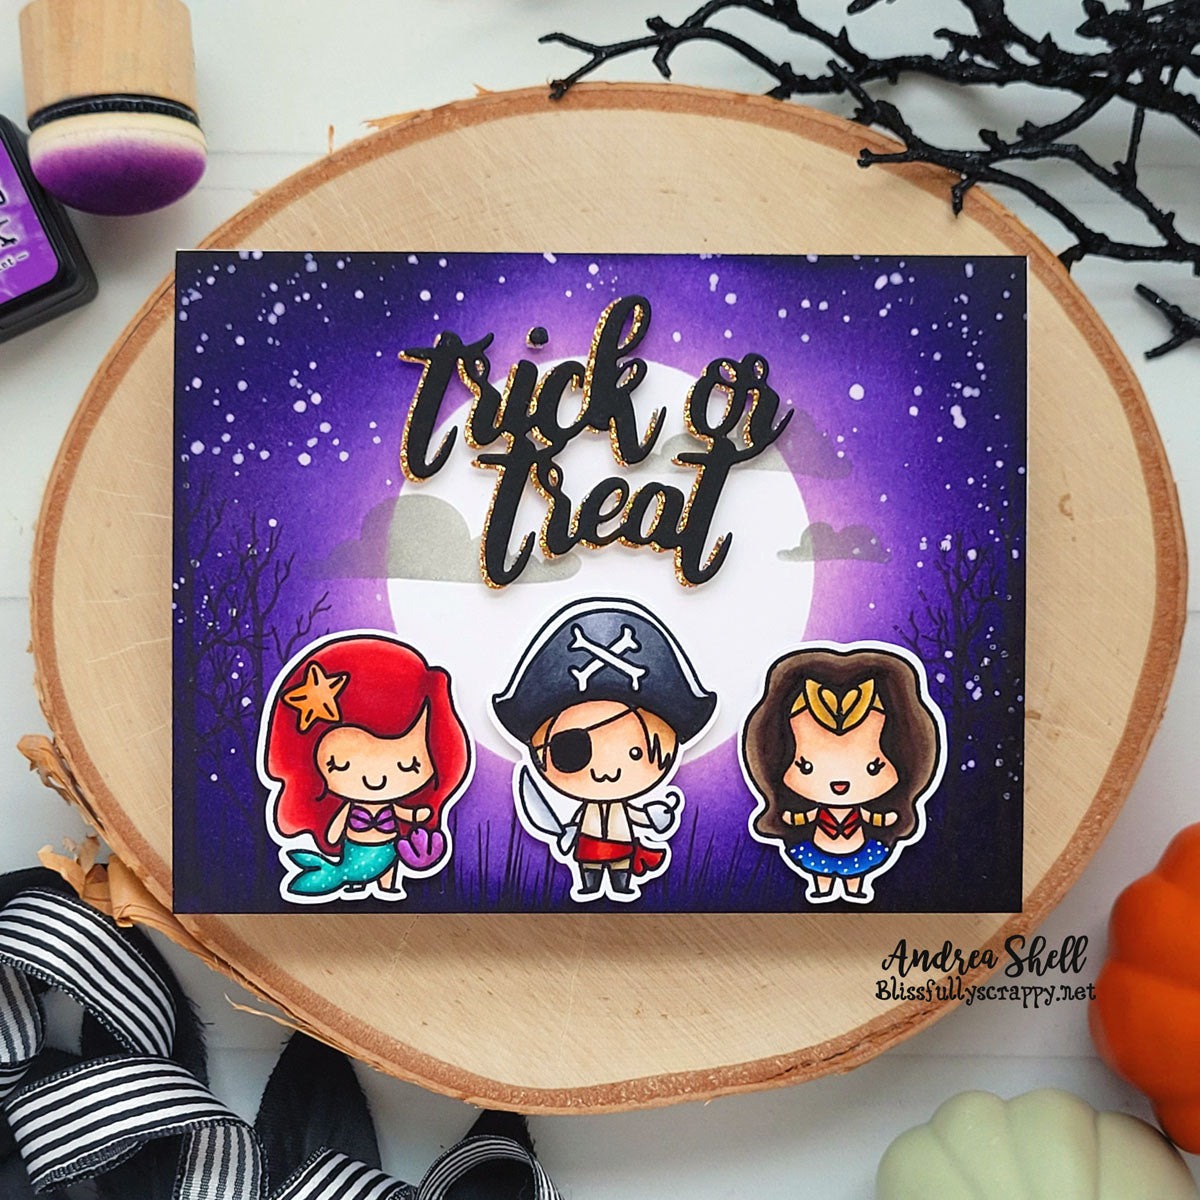 Trick or Treat from our Guest Designer Andrea Shell!